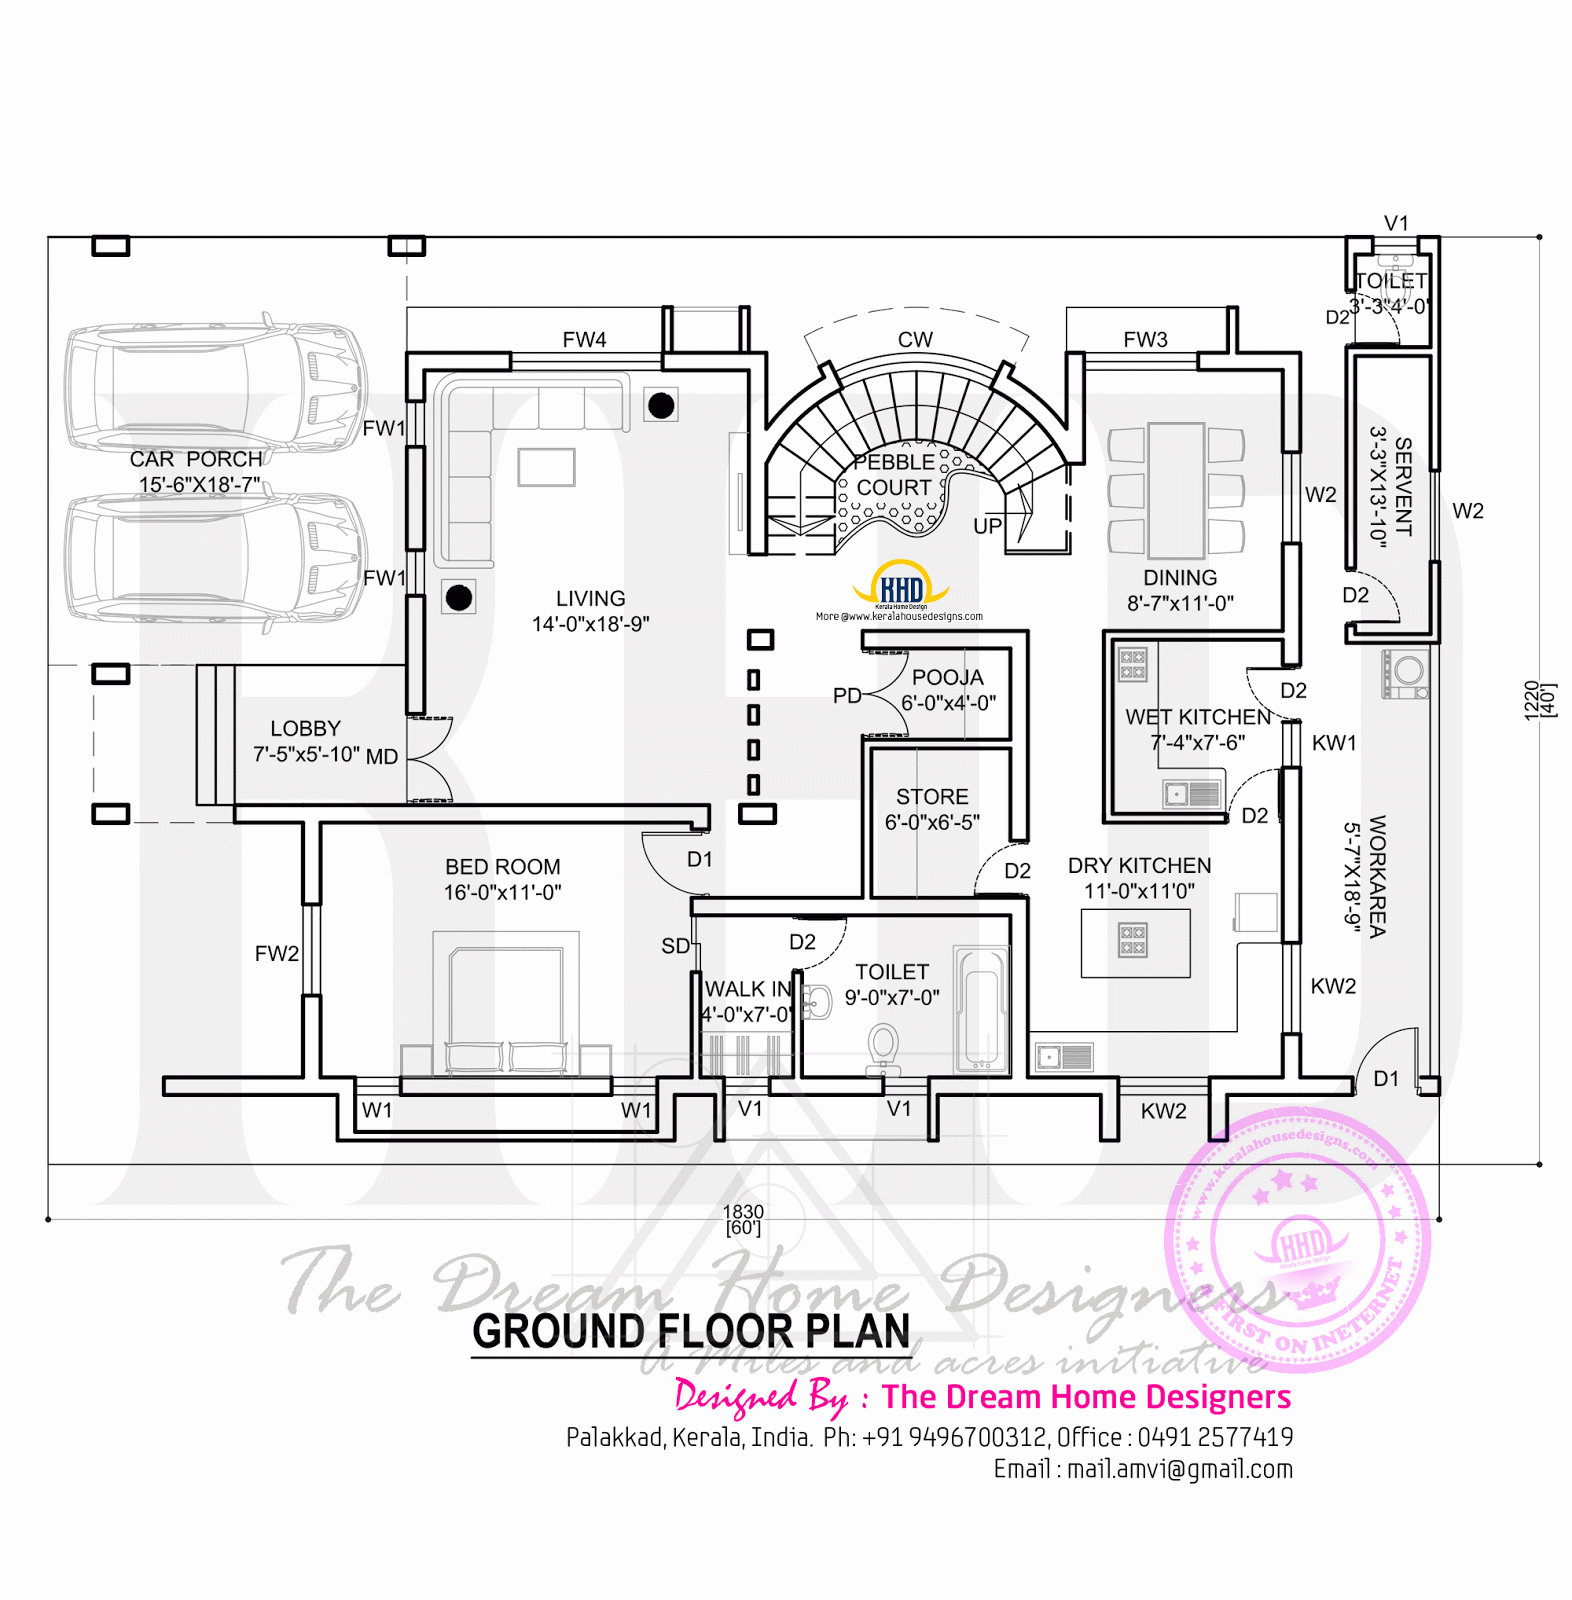 House plan with elevation - Kerala home design and floor plans